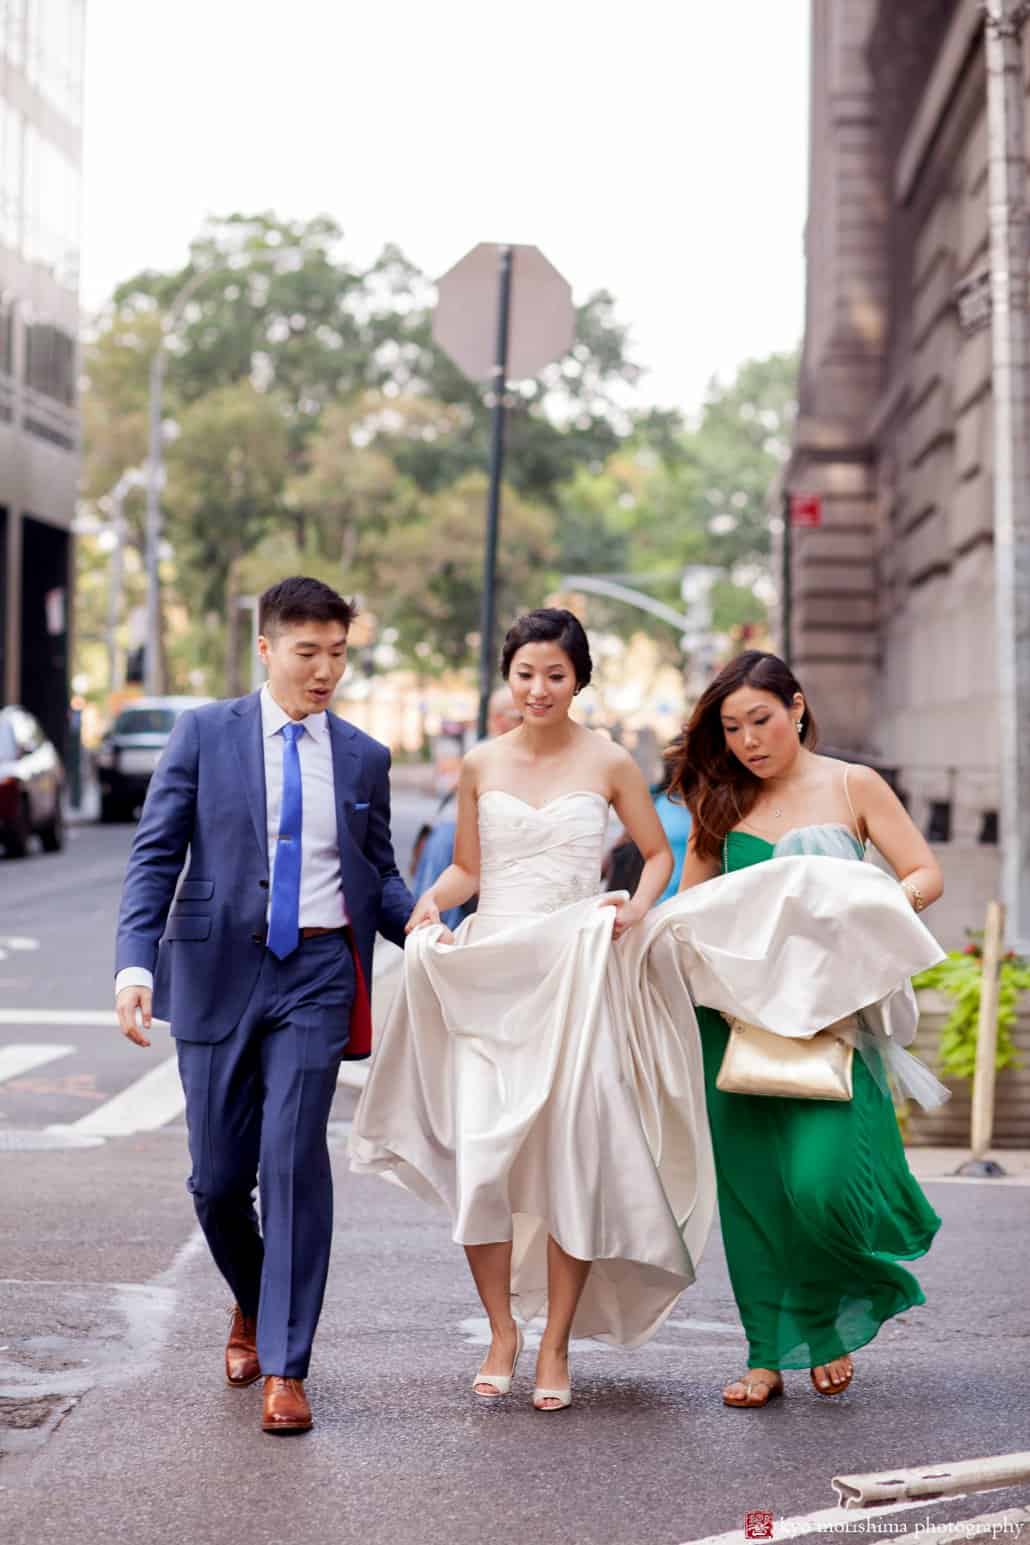 Bride with bridesmaid and groom head to India House for wedding ceremony, photographed by Wall Street wedding photographer Kyo Morishima